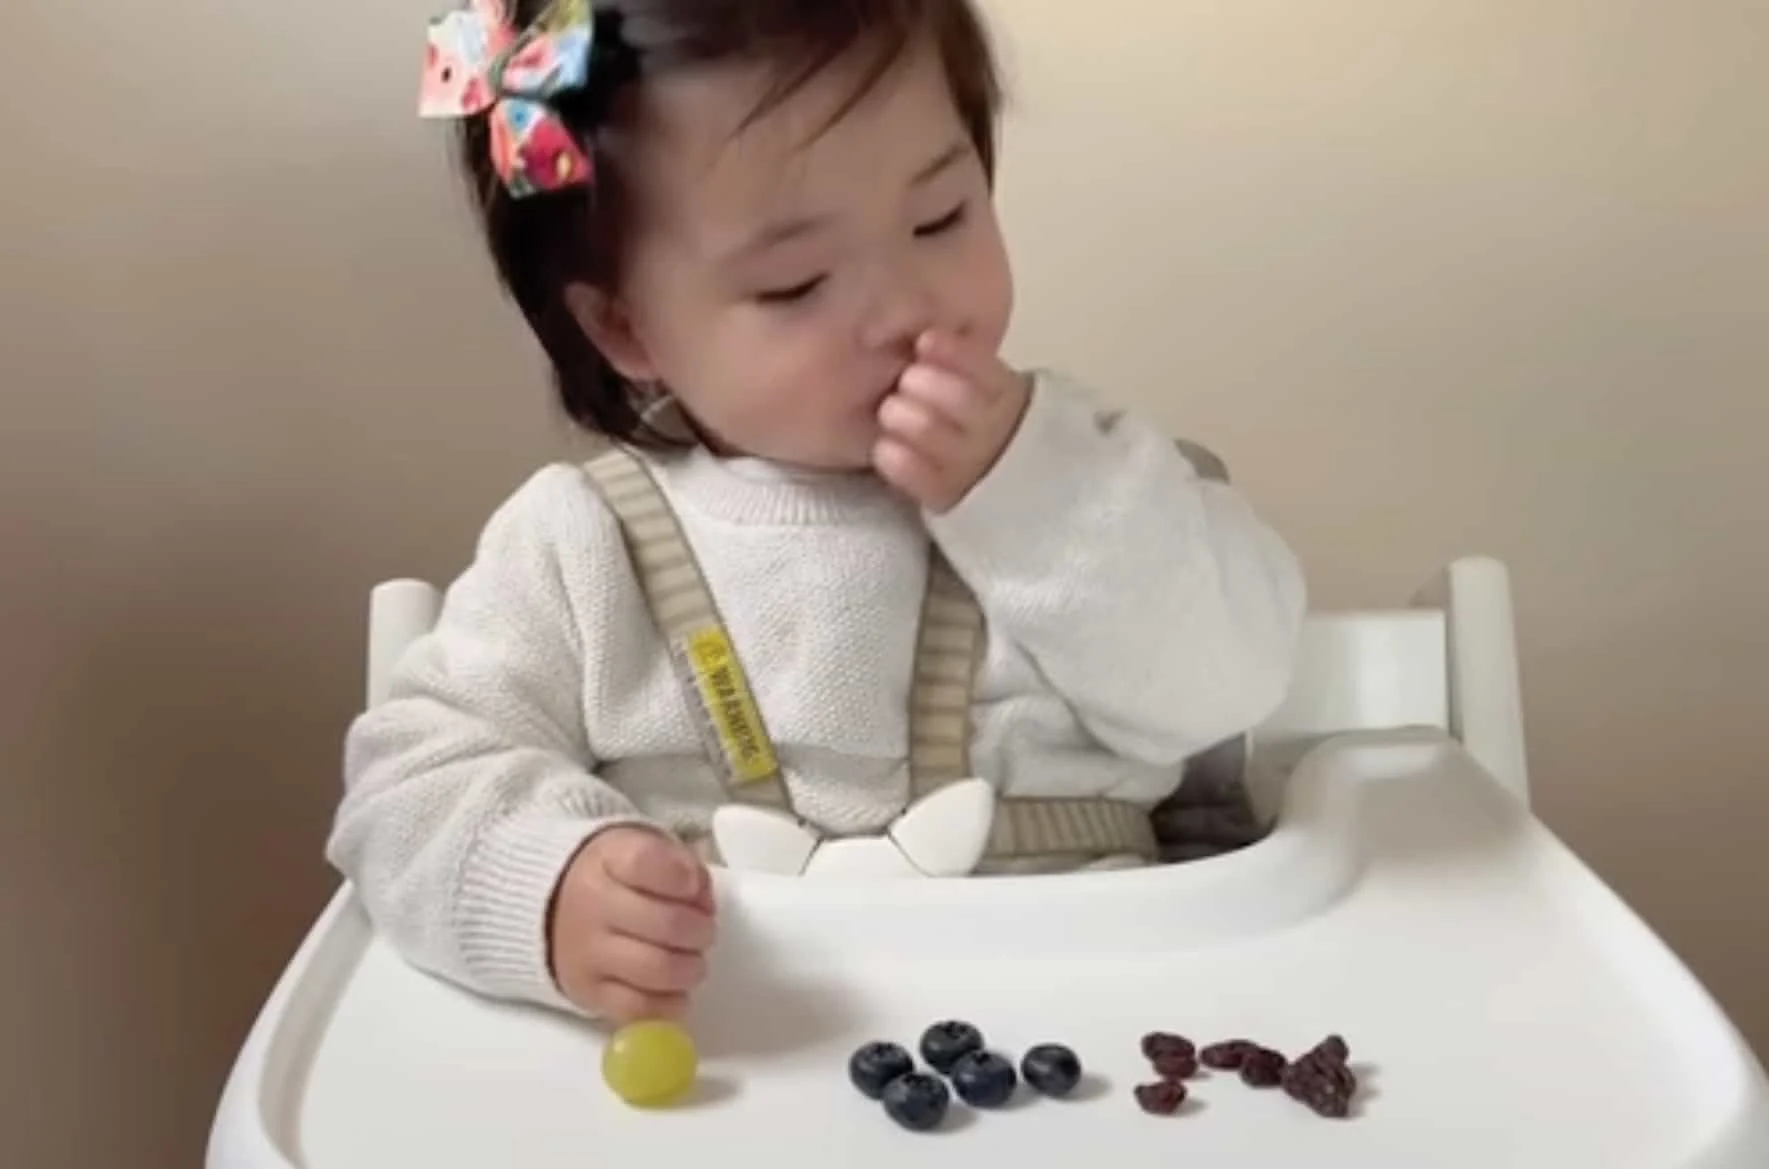 toddler sitting on a white high chair with a tray, eating blueberries and a green grape